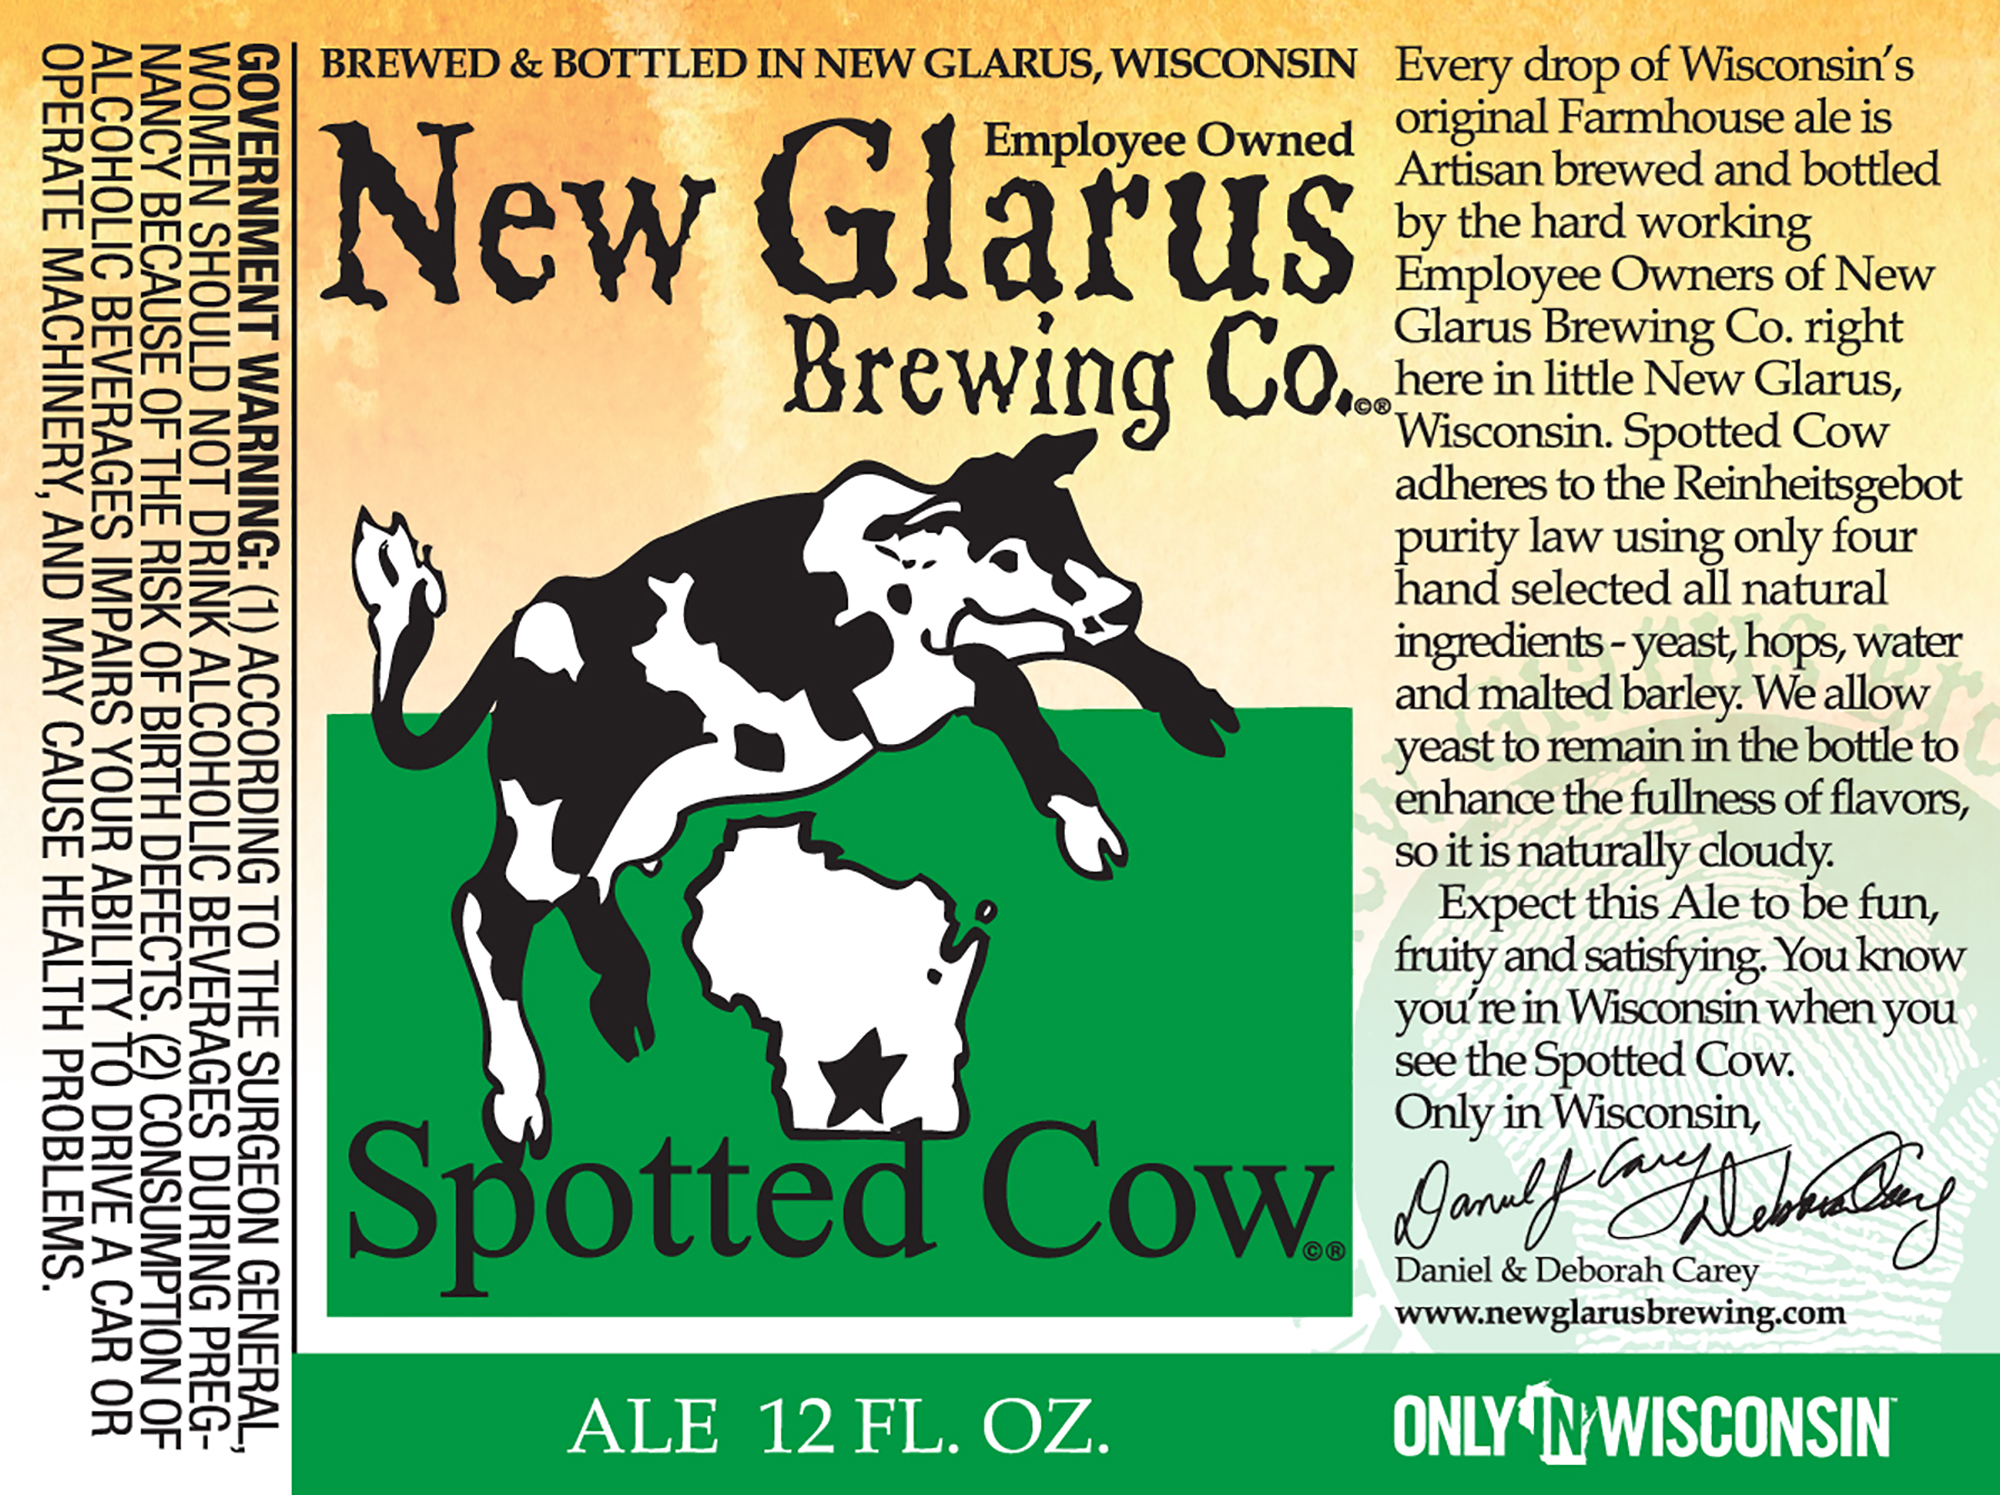 New Glarus Brewing Company's Spotted Cow